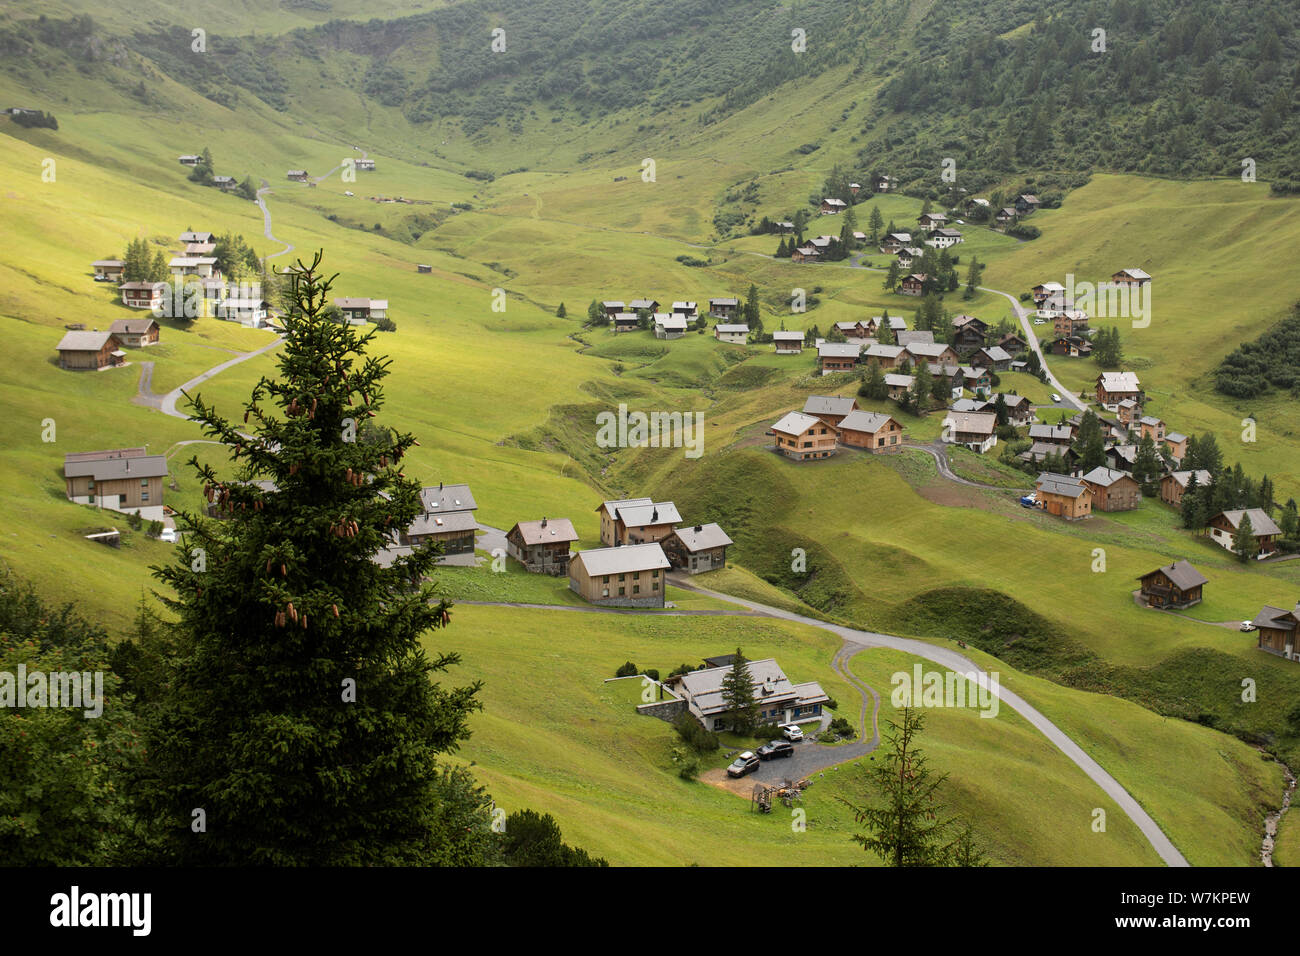 The town of Malbun, Liechtenstein, and the surrounding valley in the Alps near the Austrian border, viewed from the Sareis gondola. Stock Photo